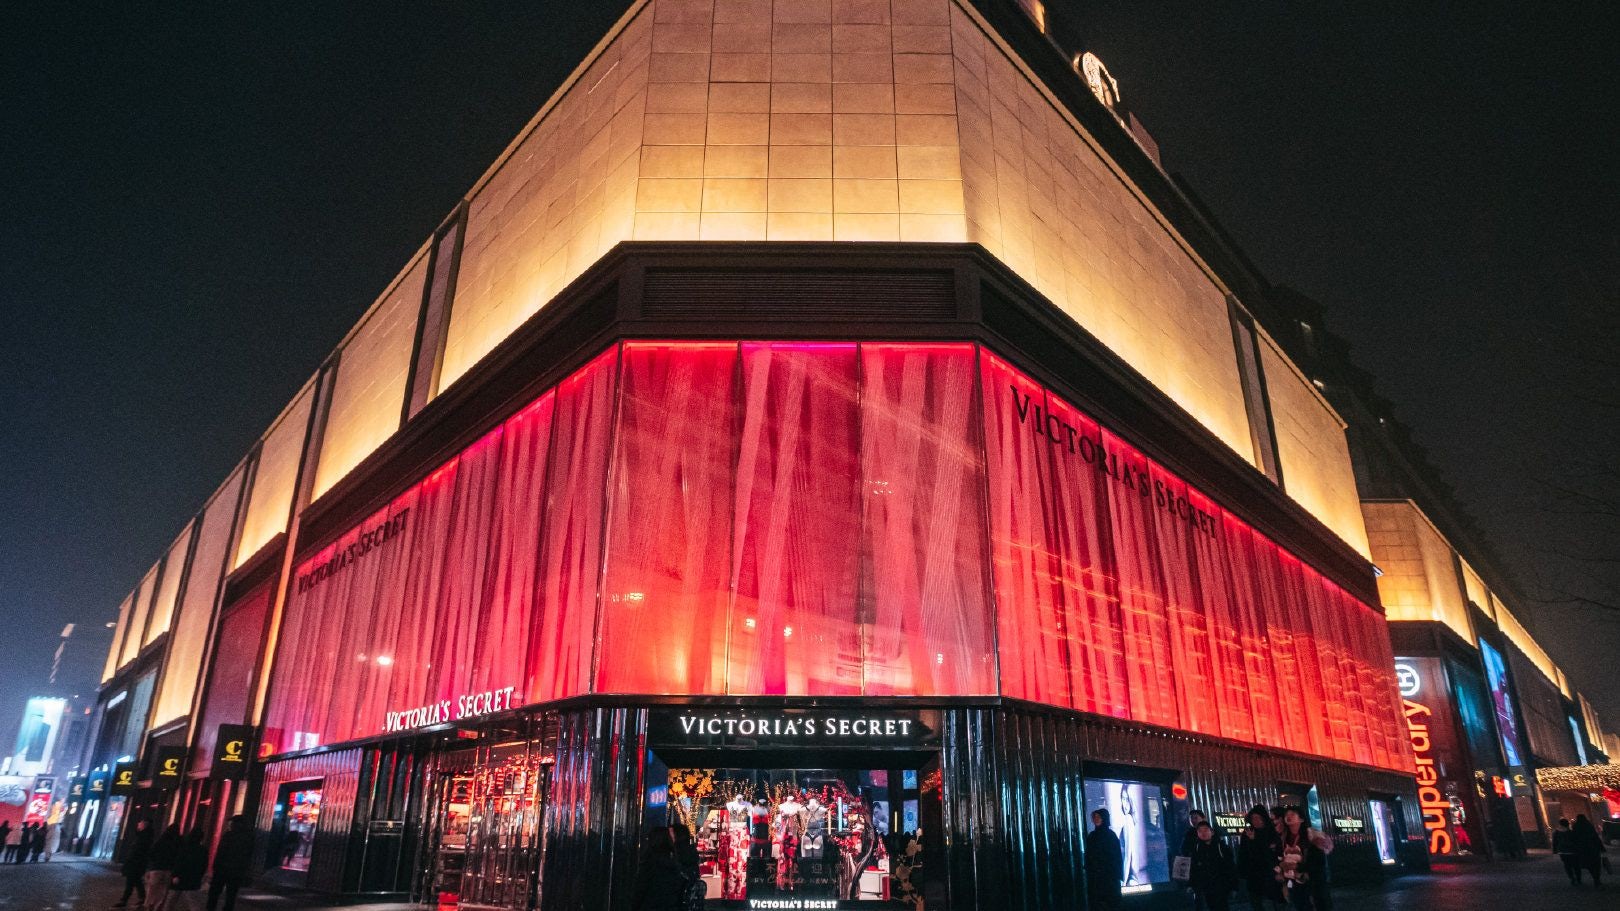 Victoria’s Secret closes Beijing flagship in a retail shift. Can the lingerie giant crack China?